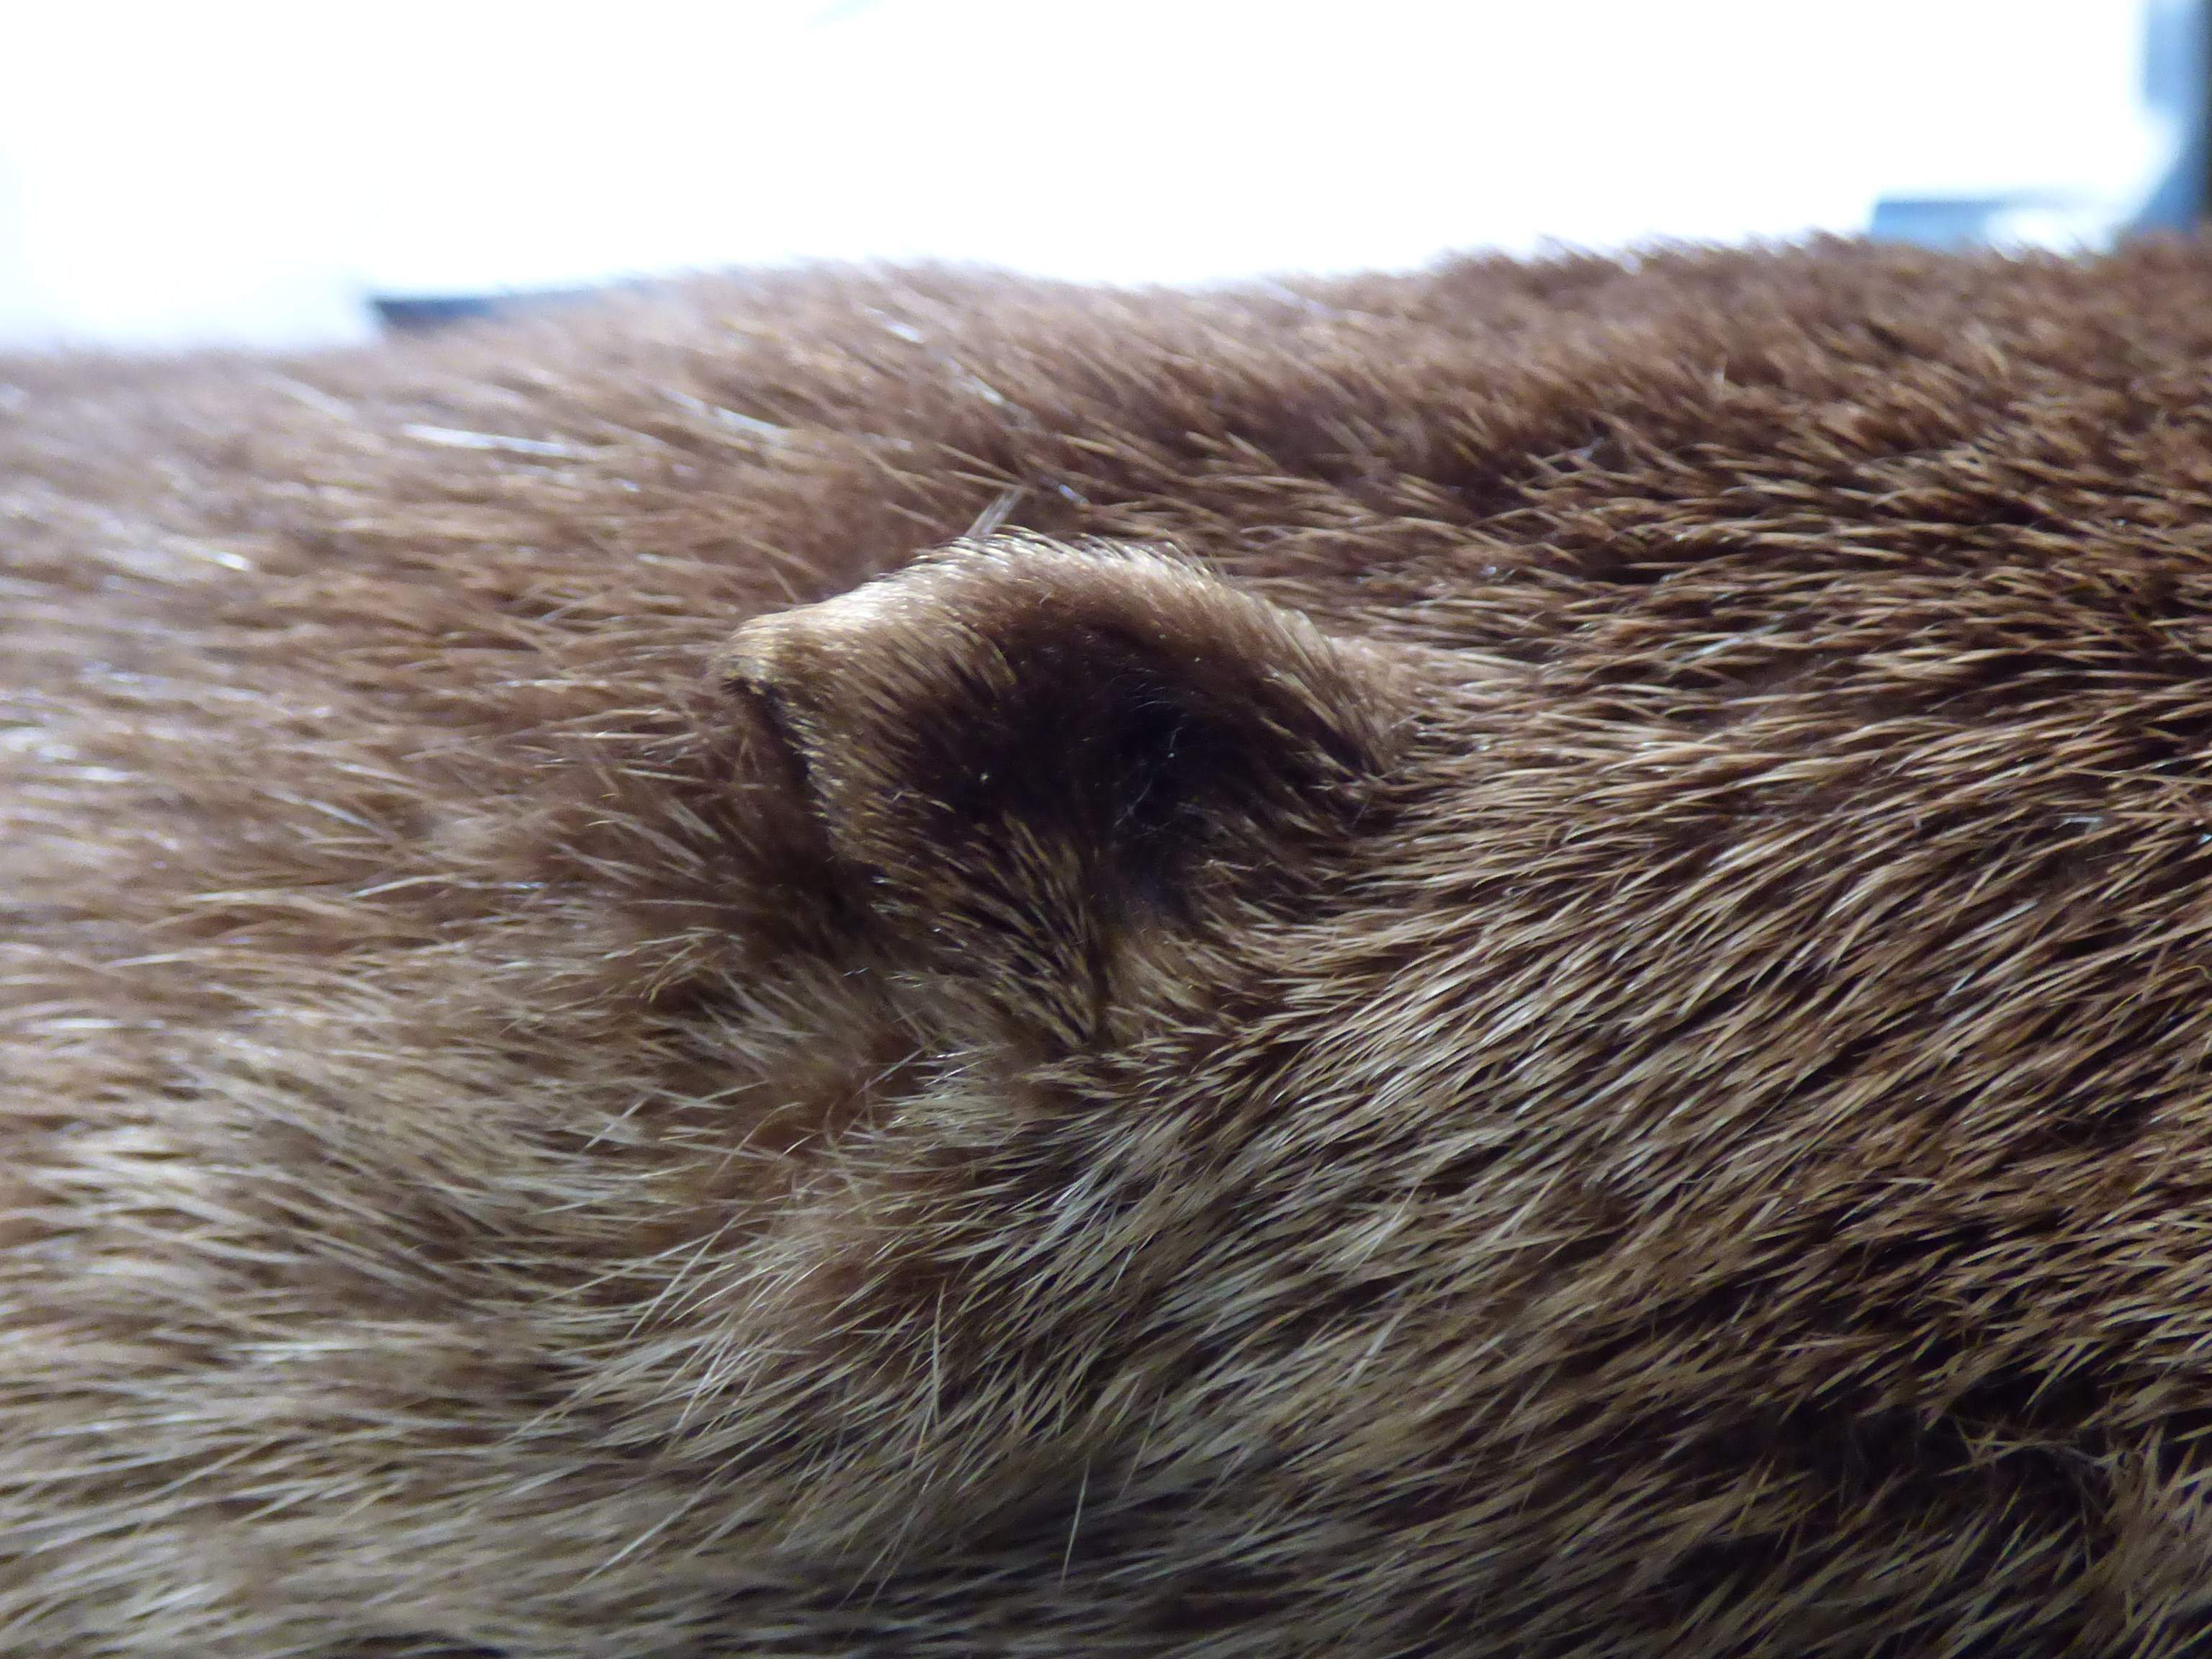 Closeup of ear of stuffed otter.  The ear rounds to a downward point.